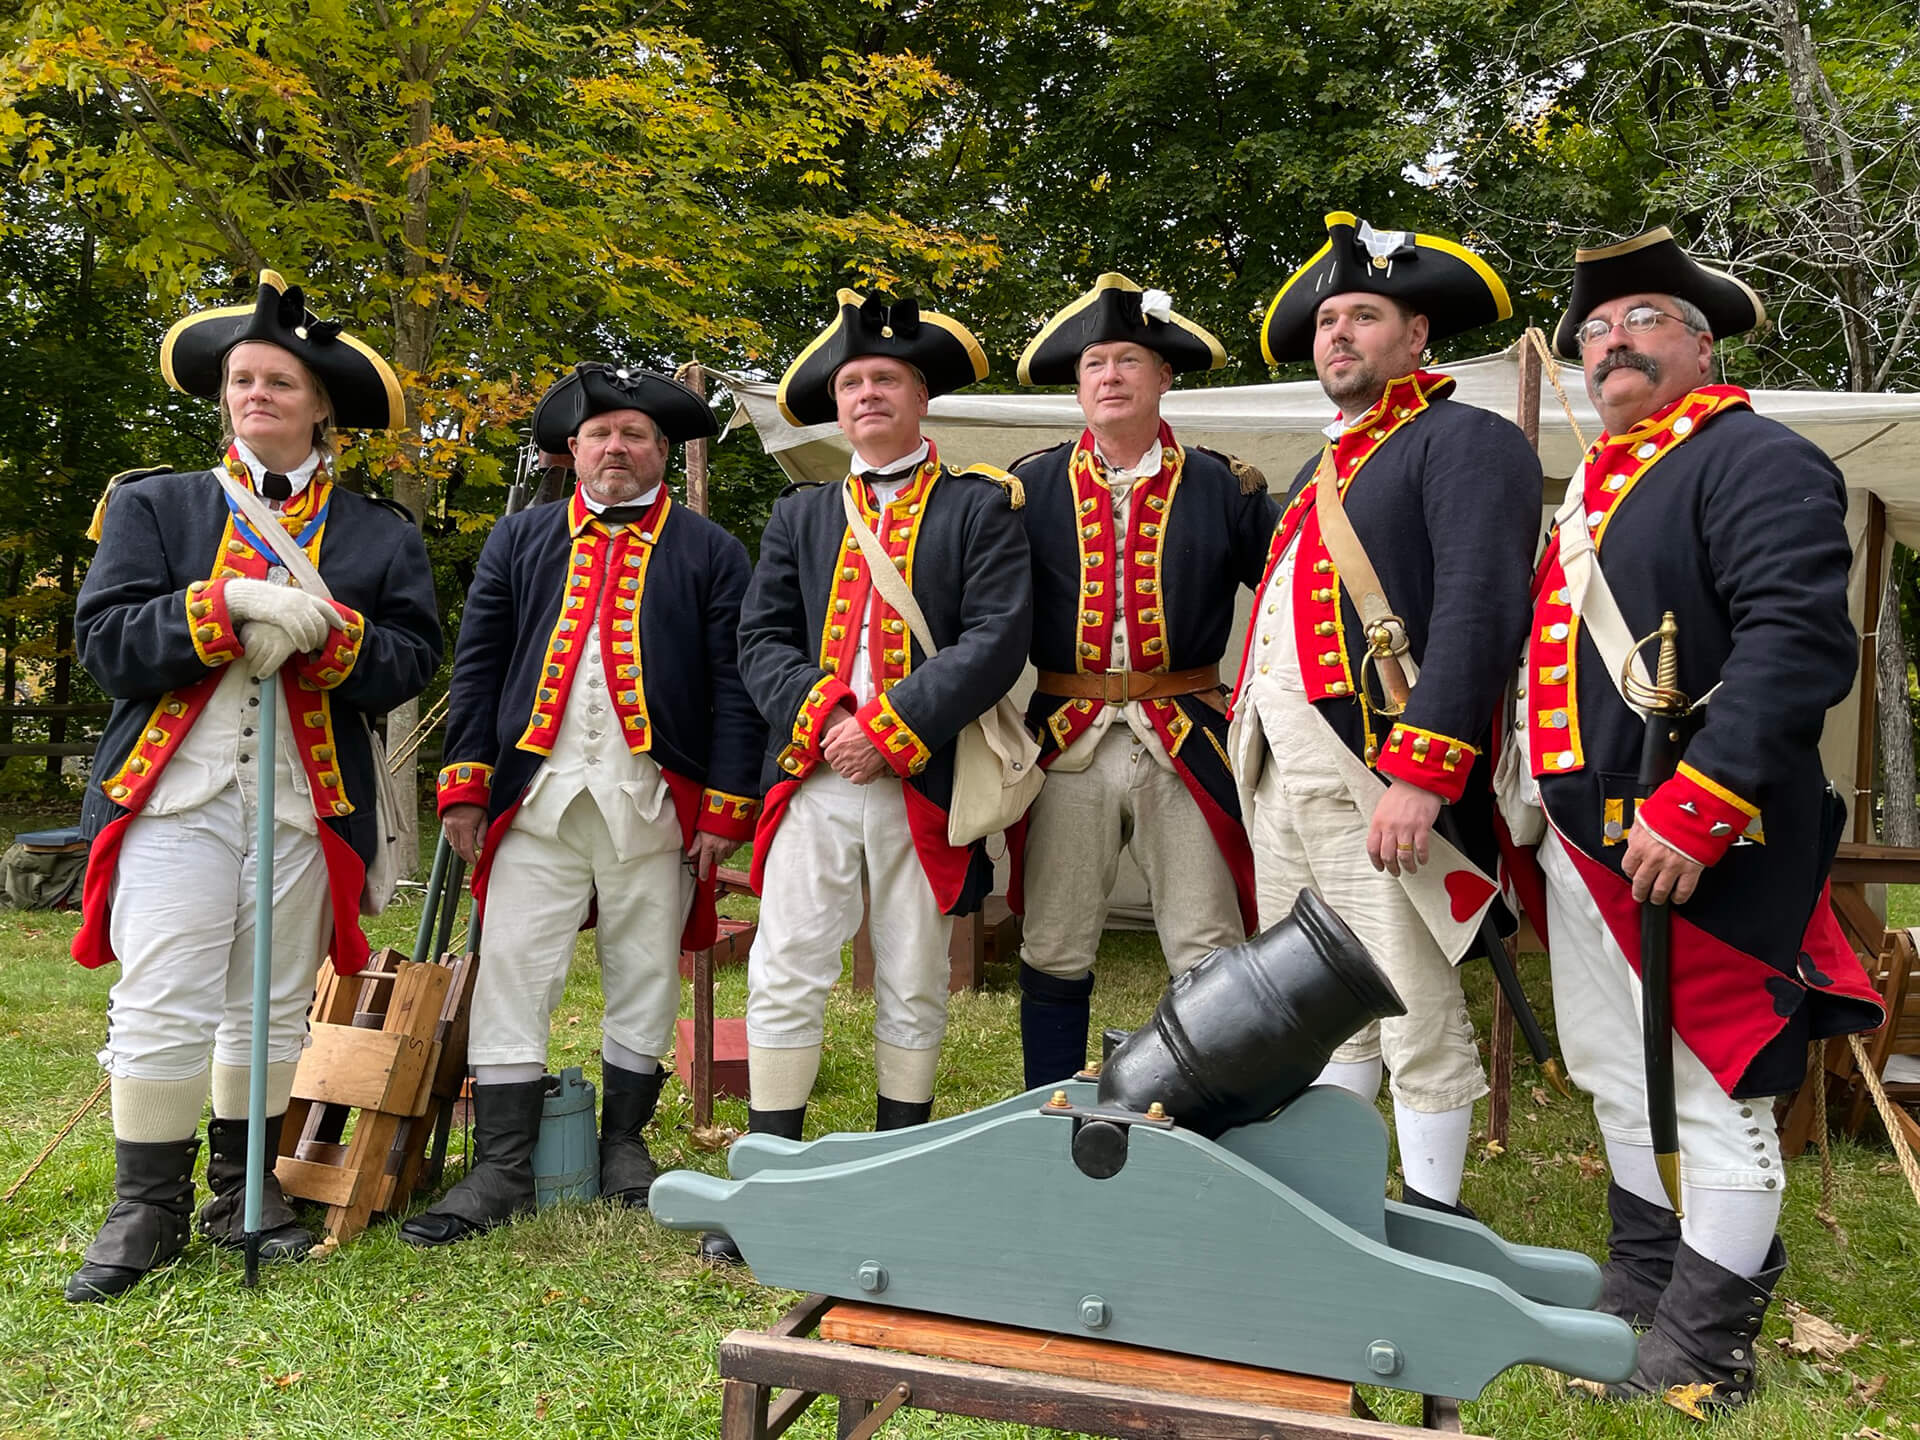 Revolutionary War reenactors near a tent with a small cannon